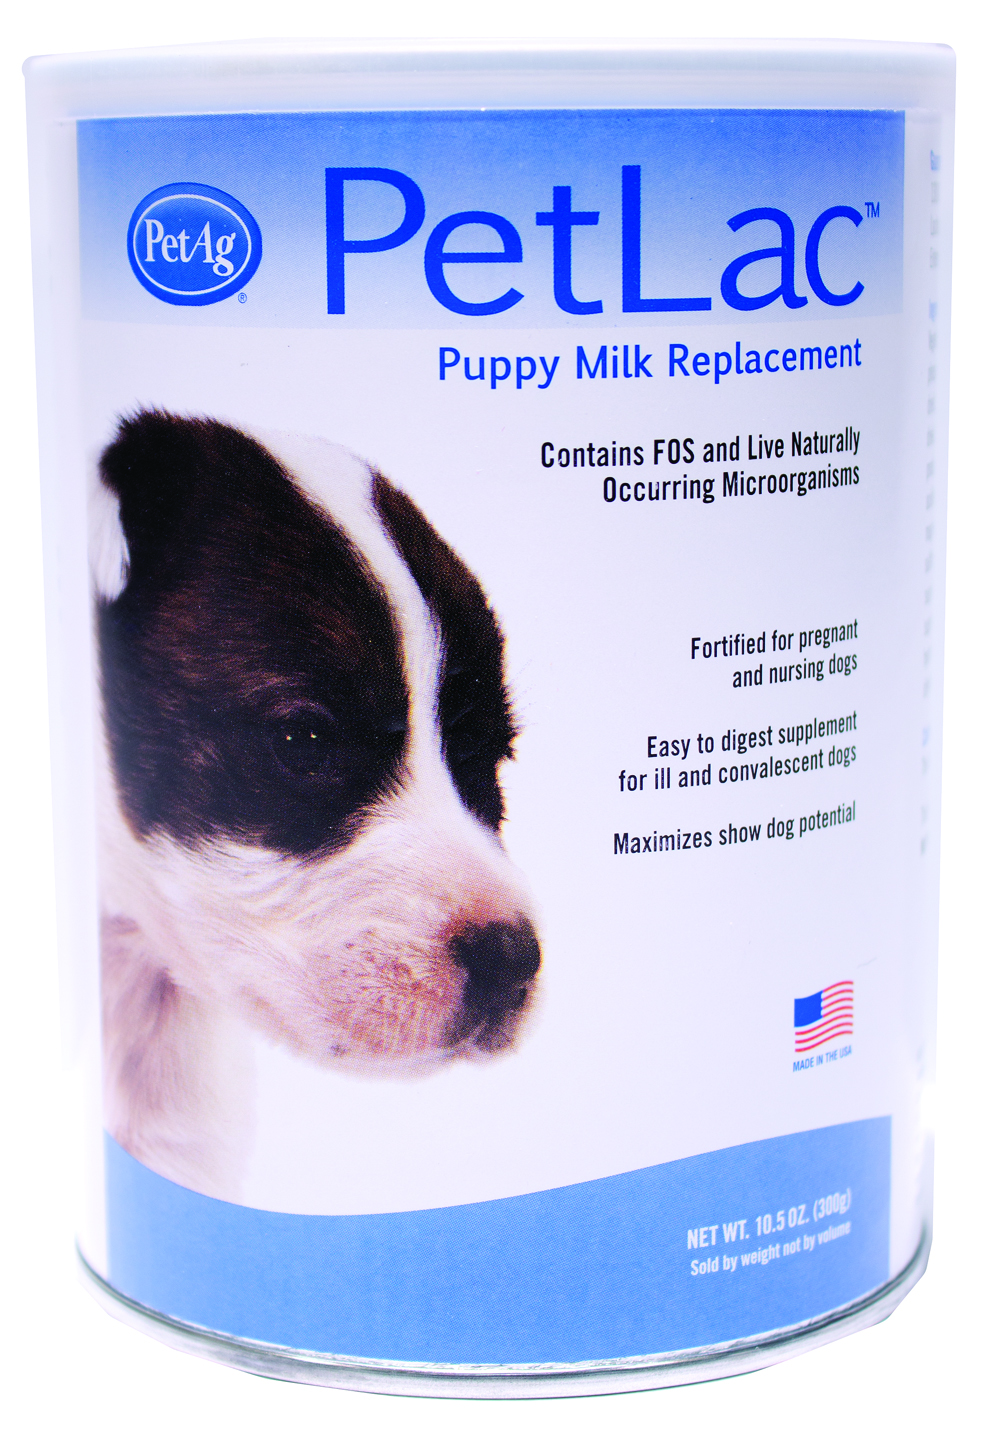 PETLAC PUPPY MILK REPLACEMENT POWDER